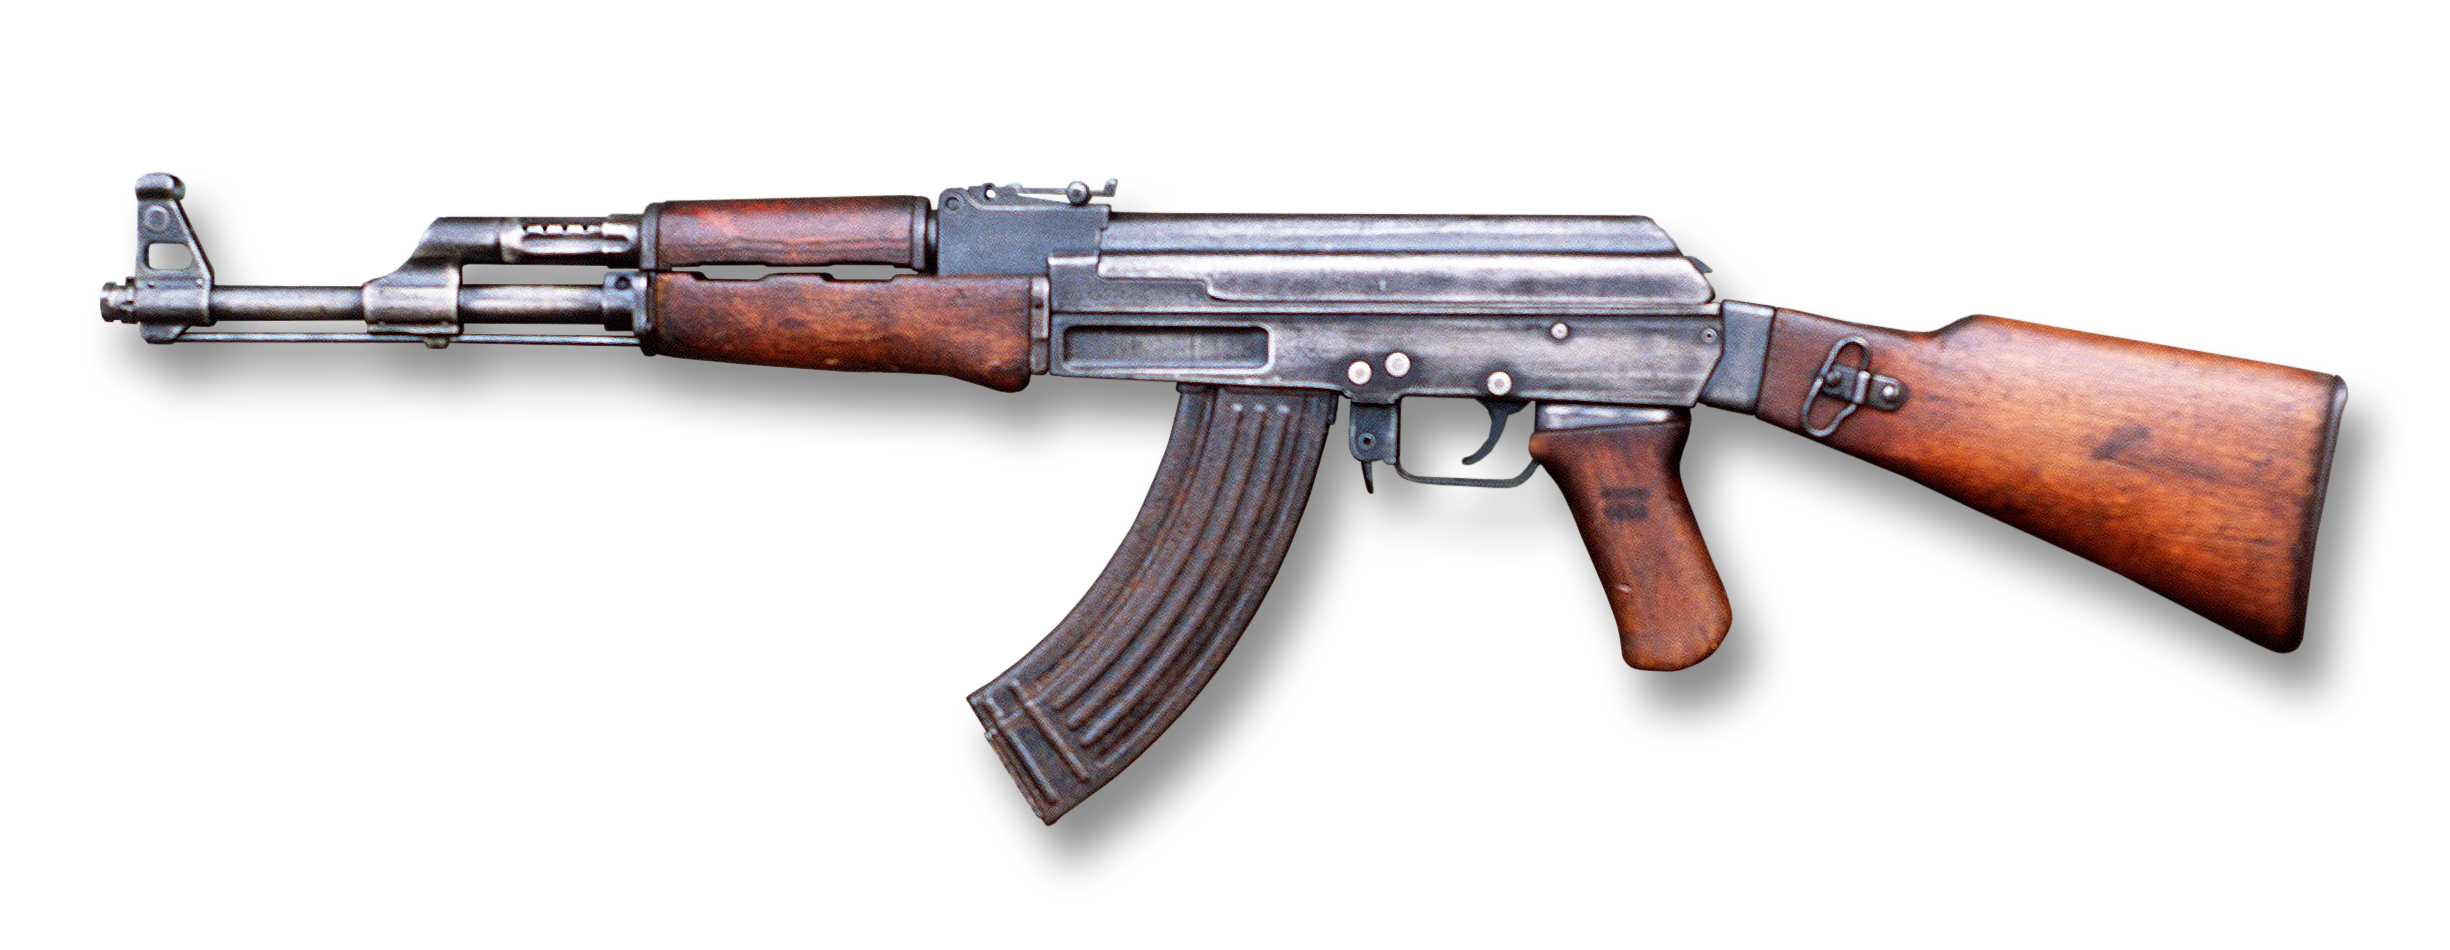 AK 47 Rifle Cartridge, Specifications, History, Design and Manufacturer